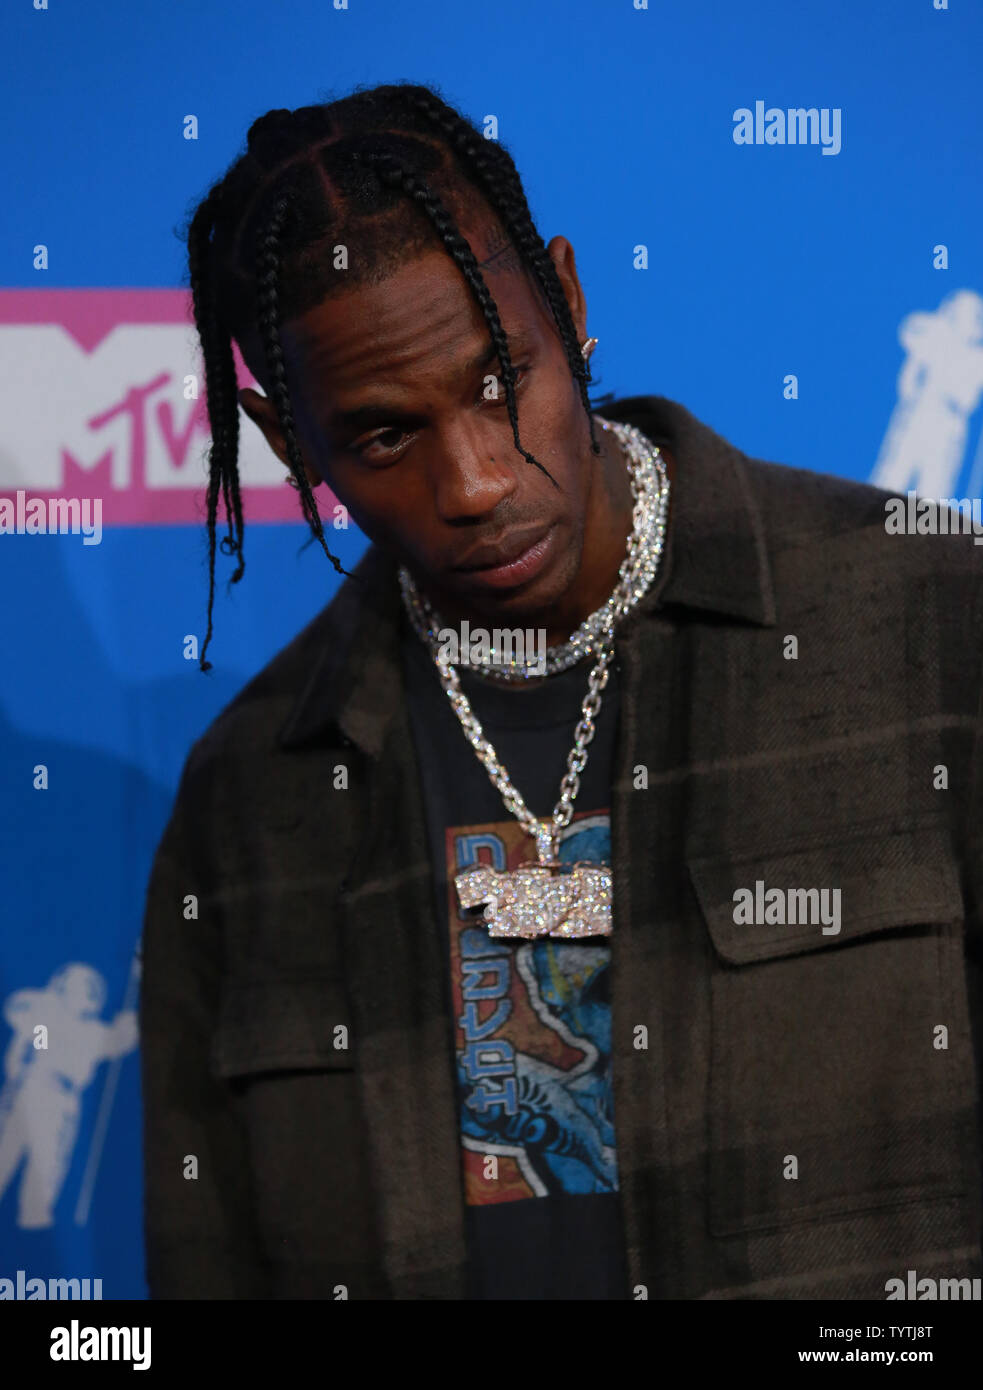 Travis Scott doesn't call it posing. He's simply “just looking down.” 📸 |  Instagram